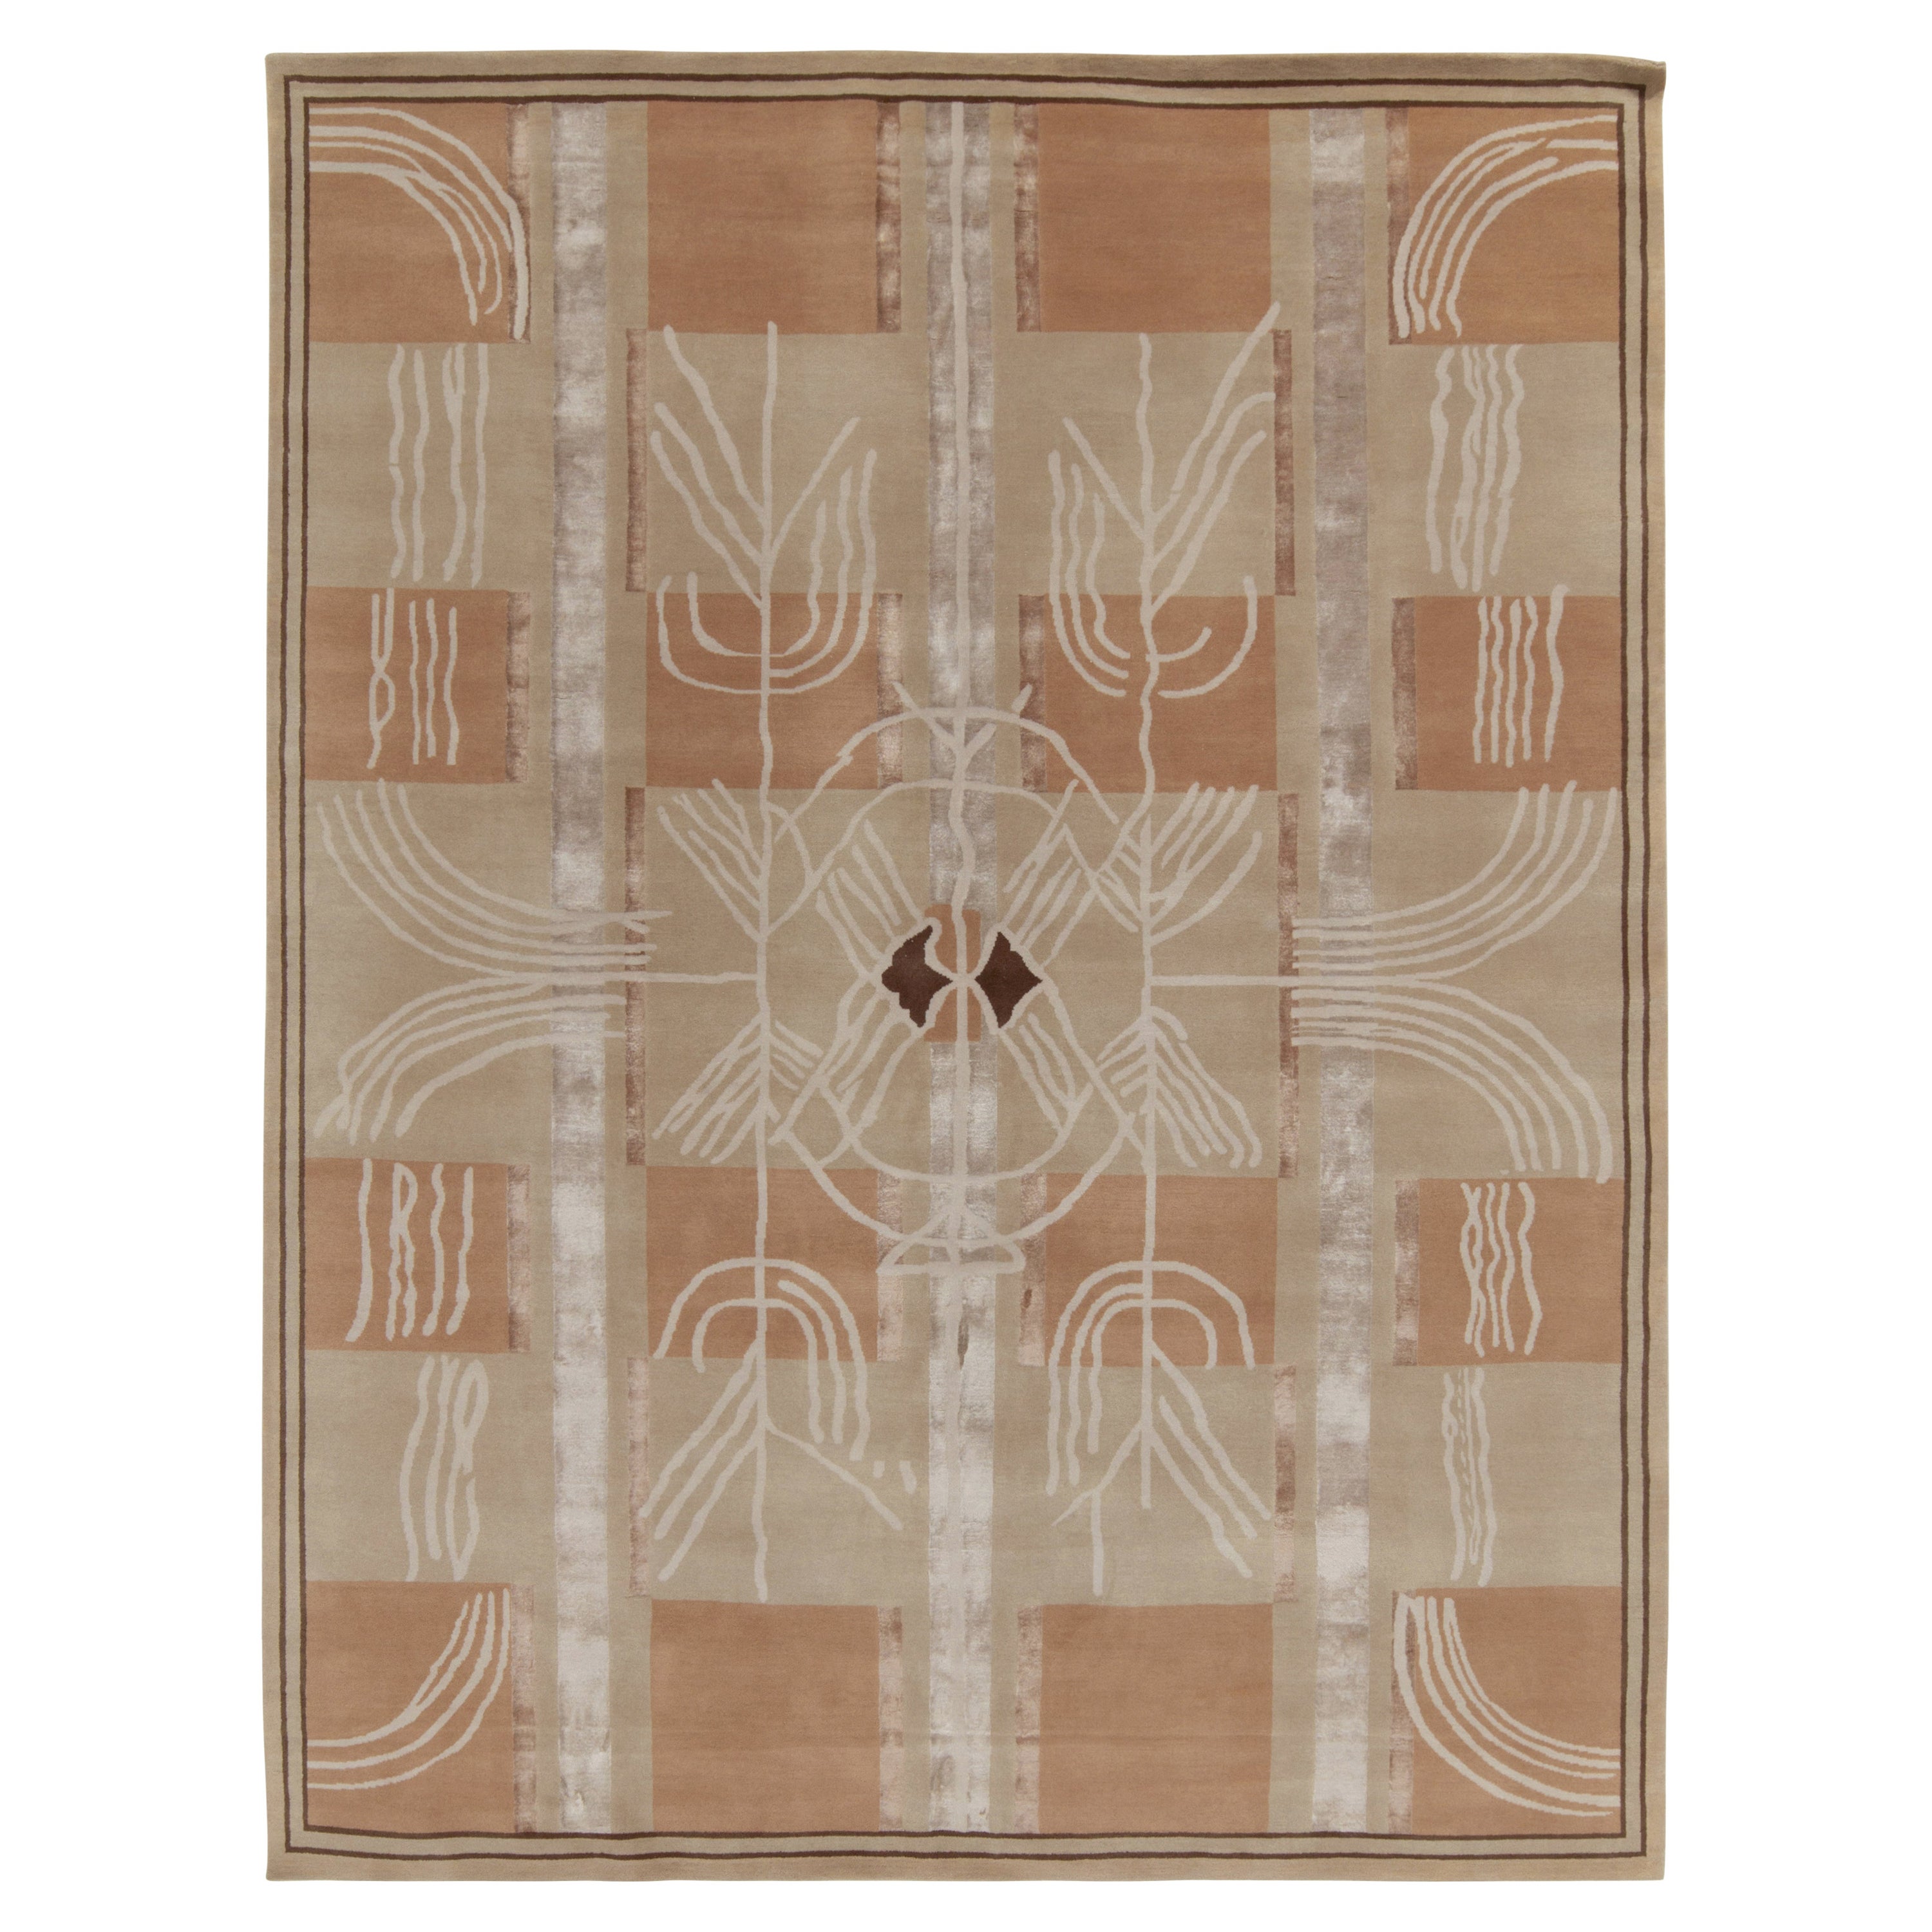 Rug & Kilim's Art Deco Style Contemporary Rug in Brown, Beige & White